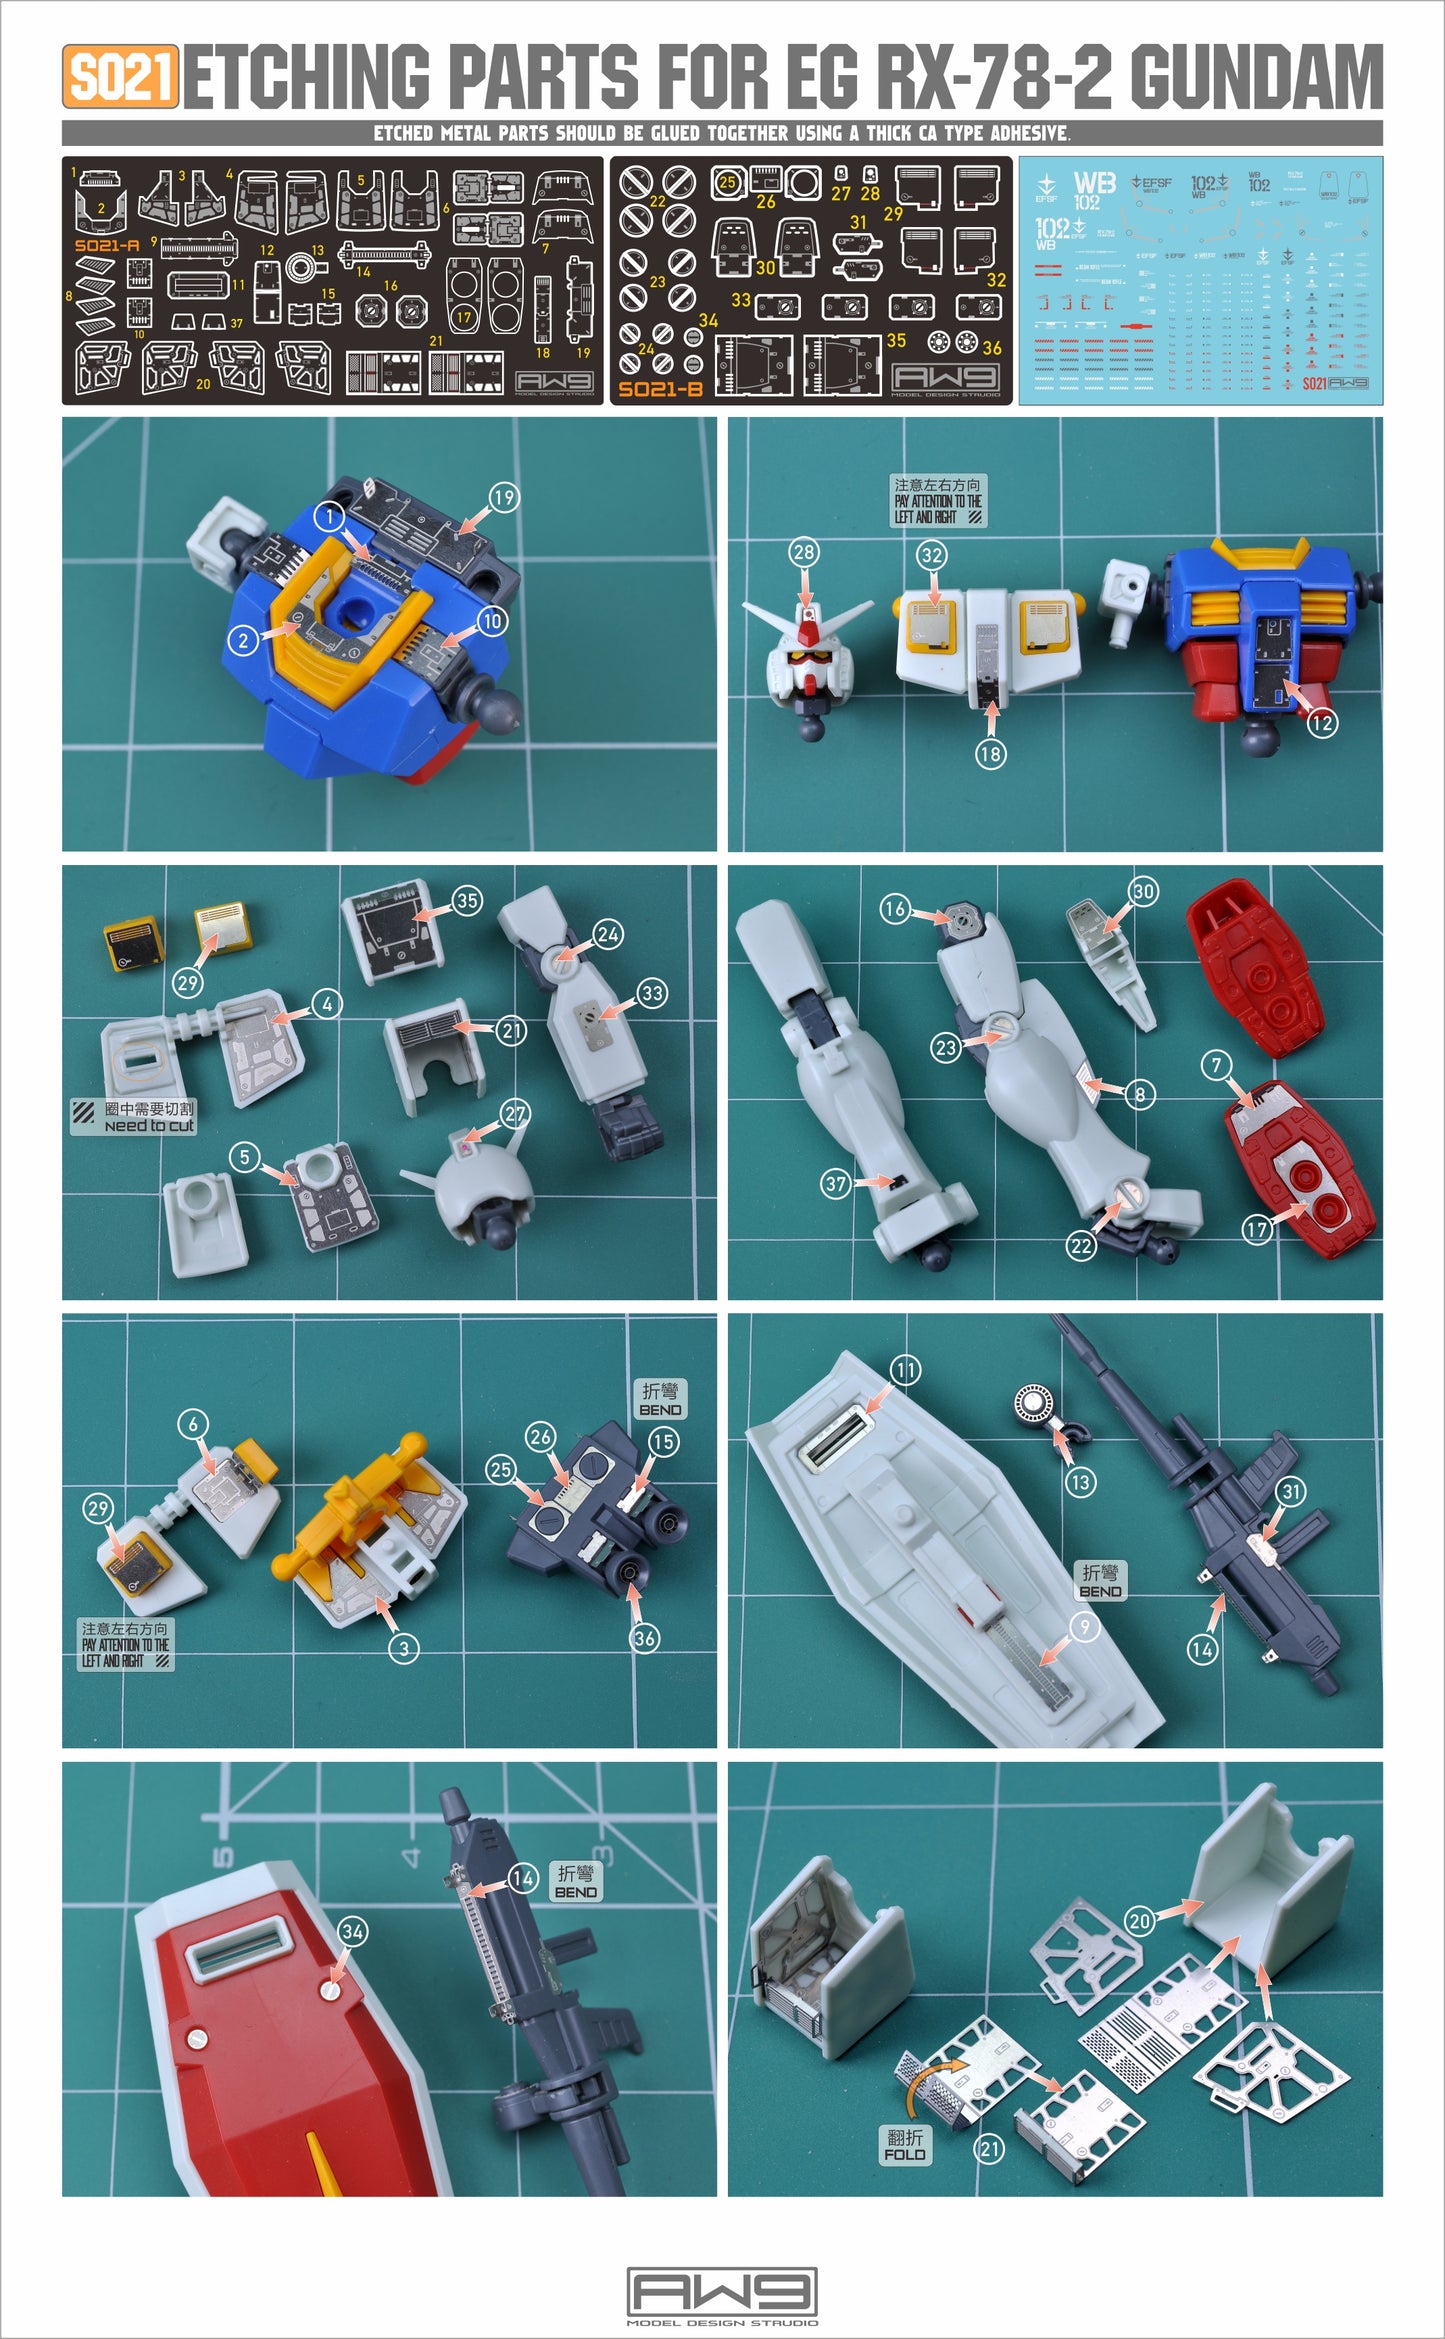 Madworks S21 Etching Parts for EG RX78-2 Gundam